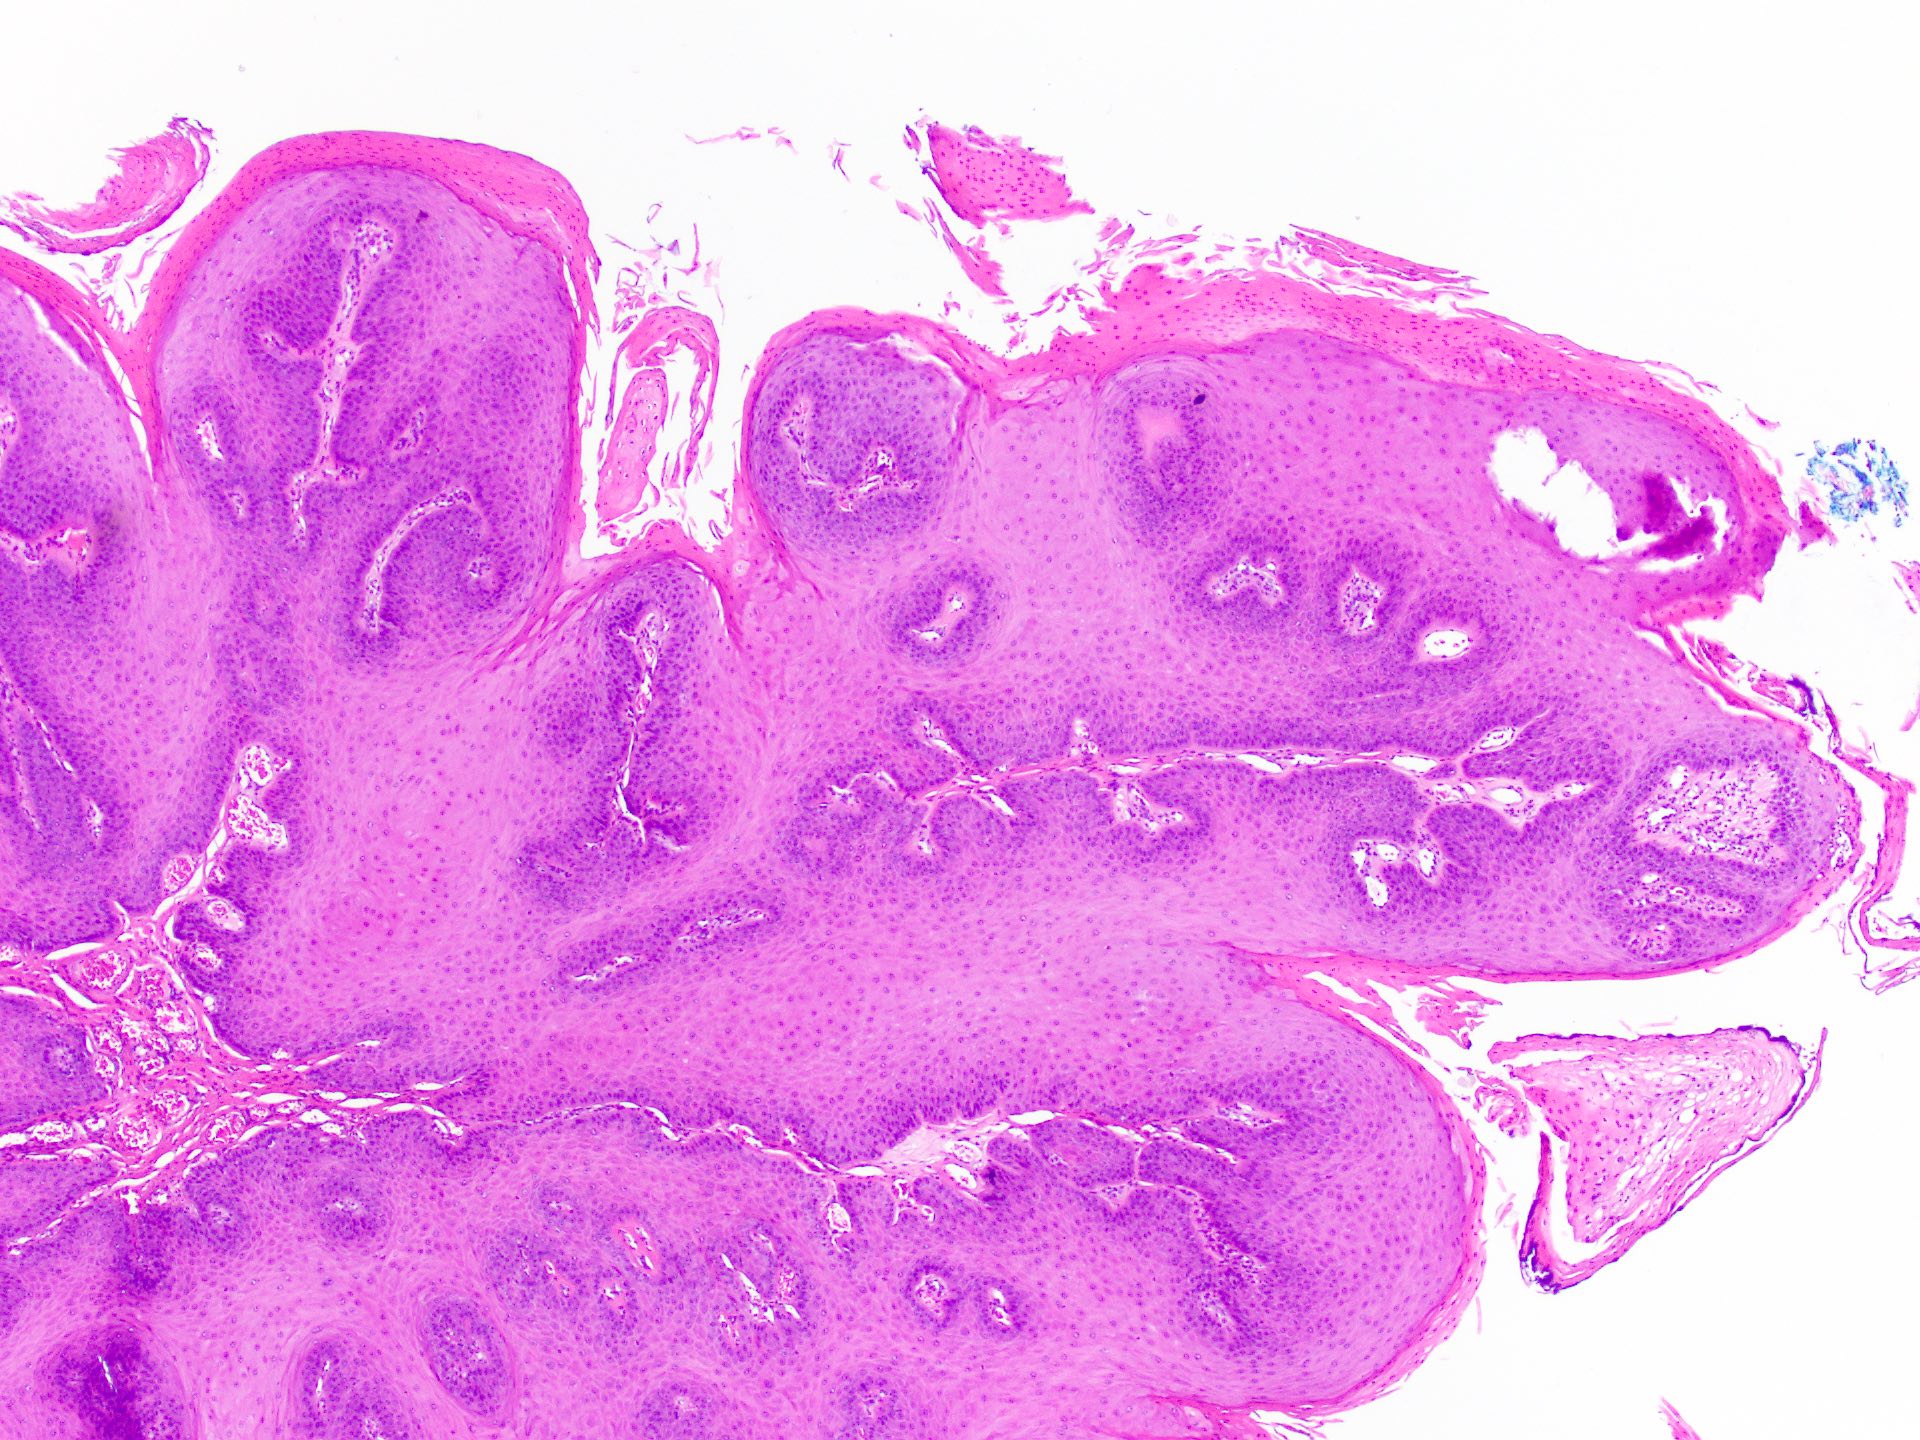 Squamous papilloma in tongue, Papillary urothelial hyperplasia bladder, Squamous papilloma def